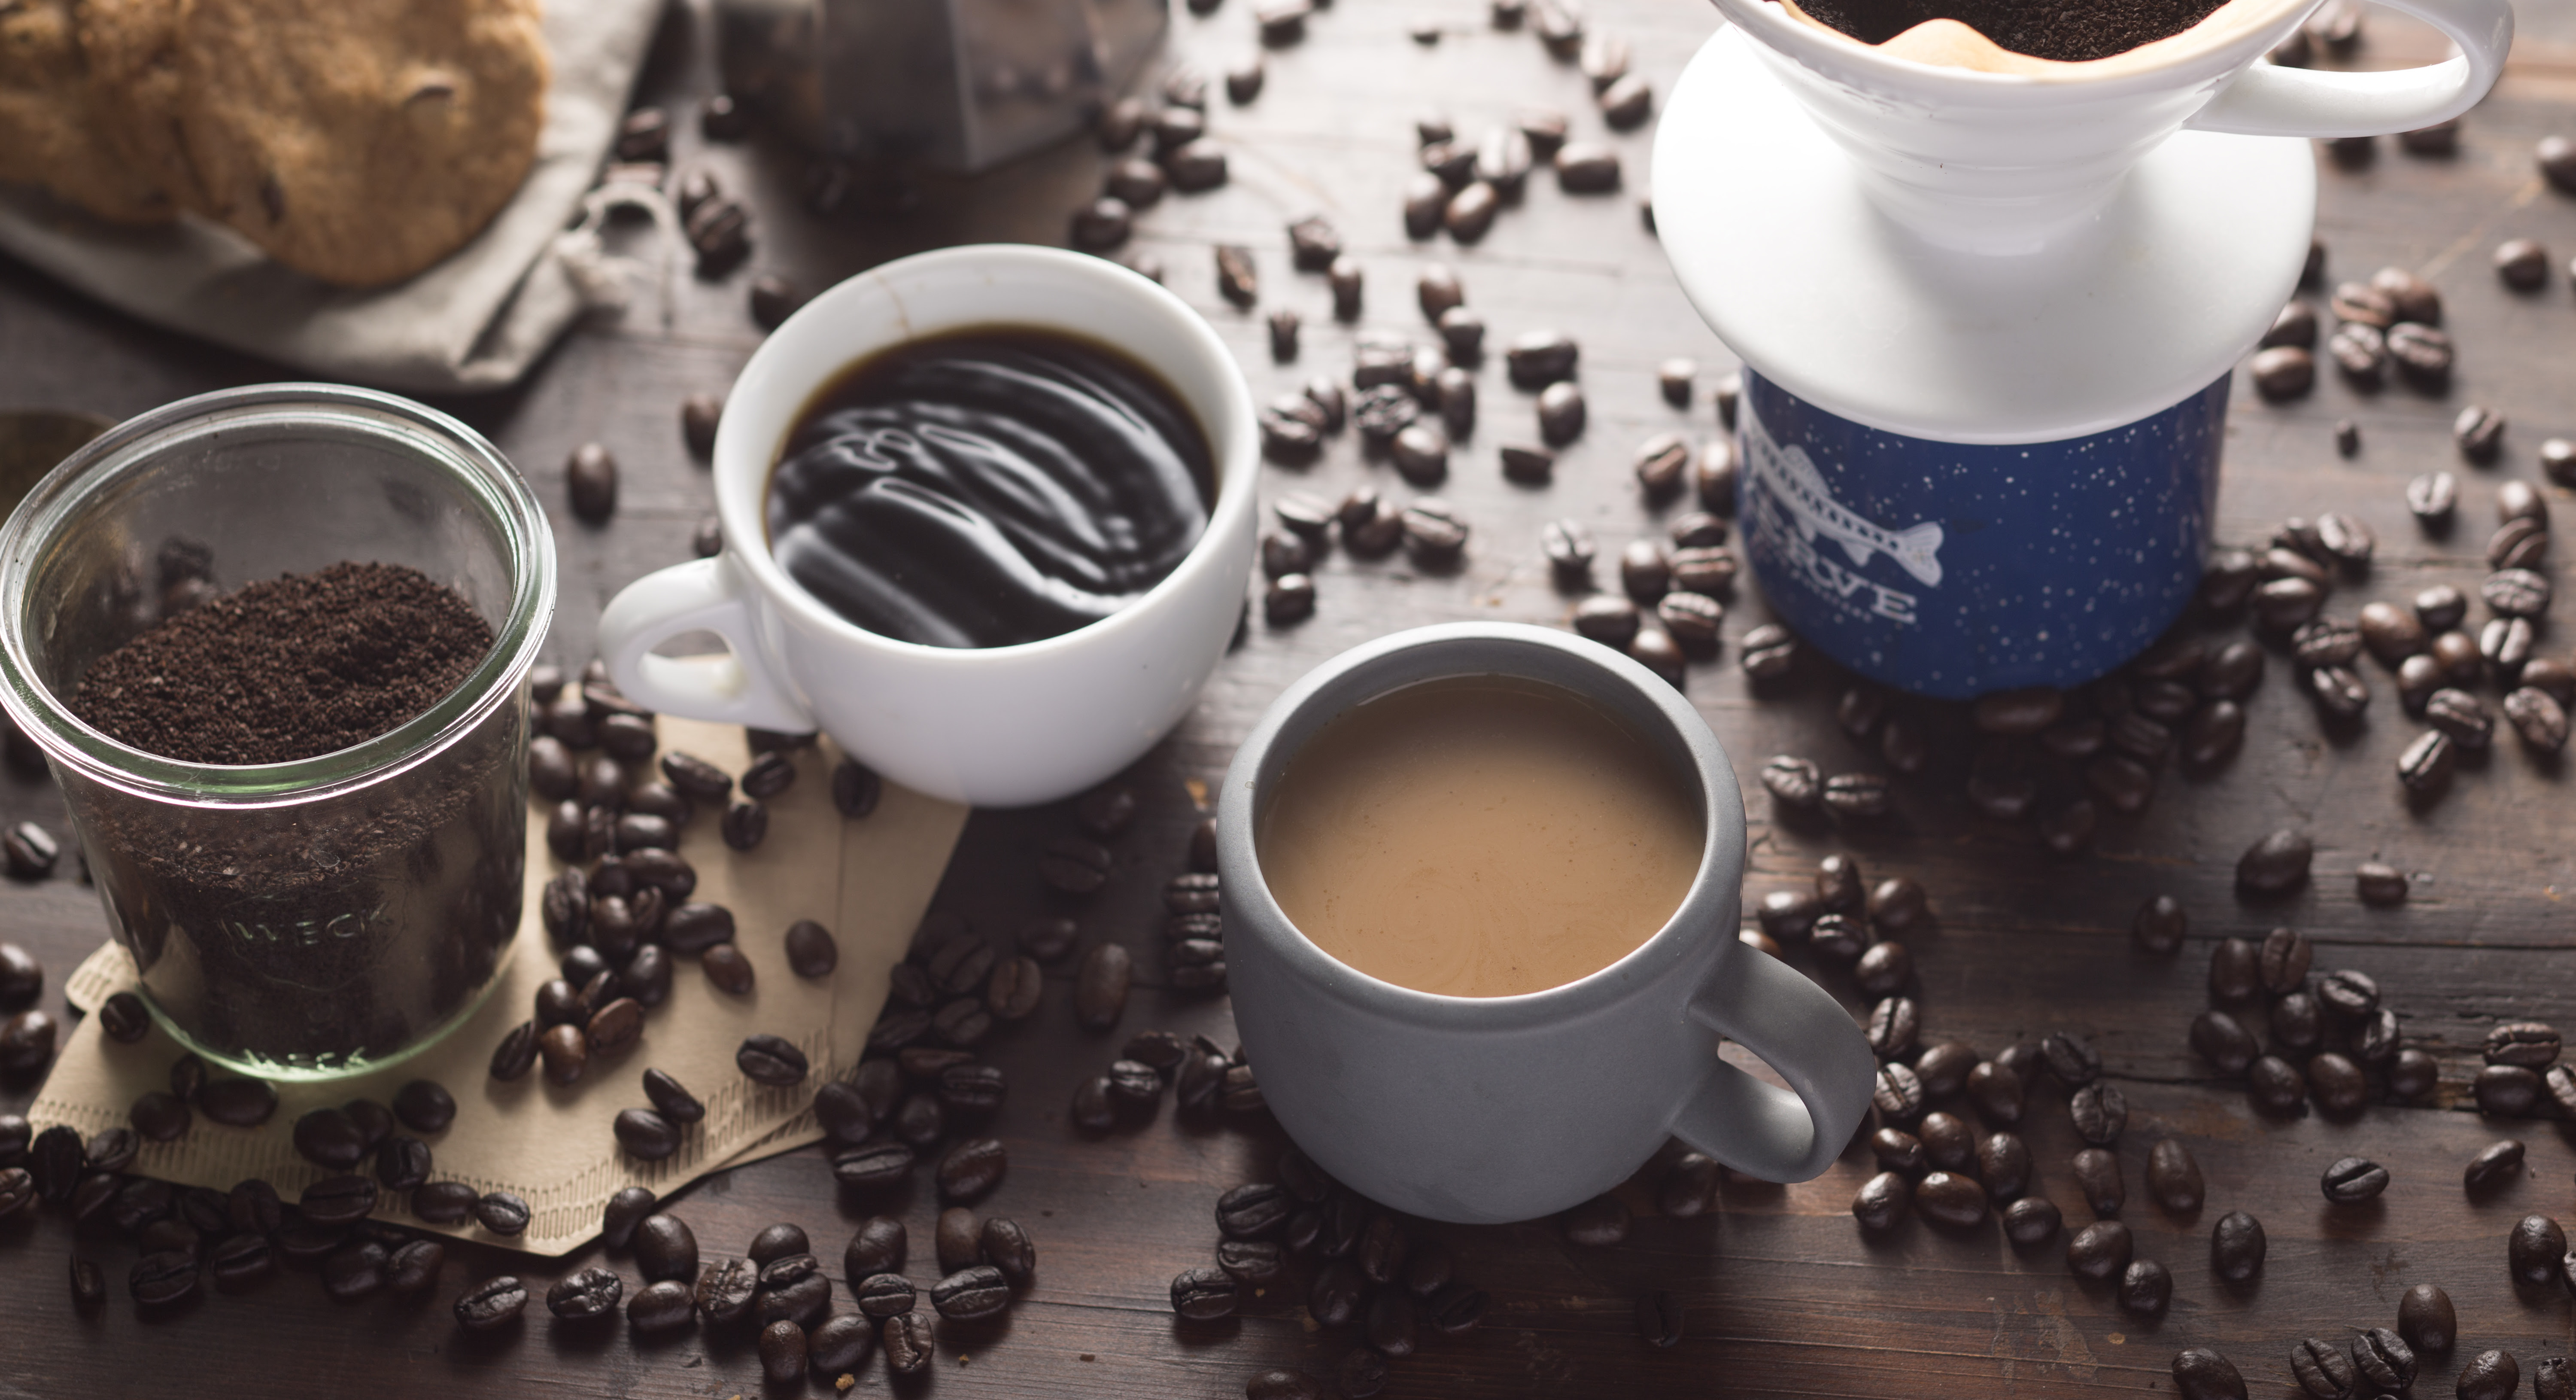 Good News for Caffeine Addicts: Coffee May Help Extend Your Life